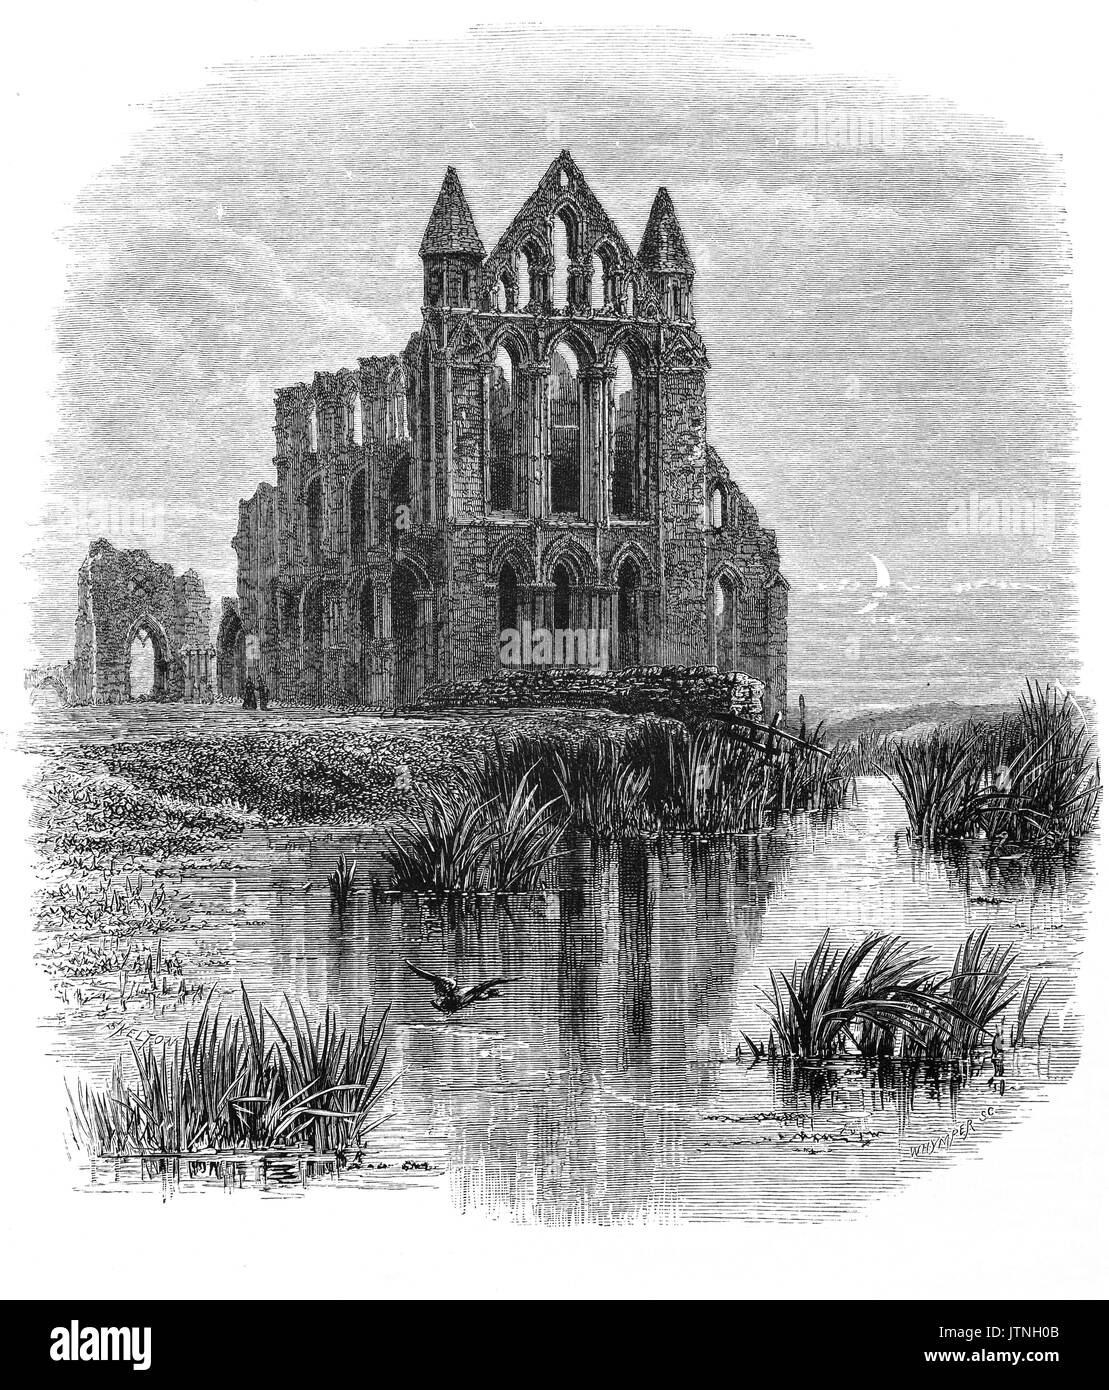 1870: Whitby Abbey in the moonlight. The 13th-century ruined Benedictine abbey overlooks the North Sea on the East Cliff above Whitby in North Yorkshire, England. It was dis-established during the Dissolution of the Monasteries- under the auspices of Henry VIII. Stock Photo